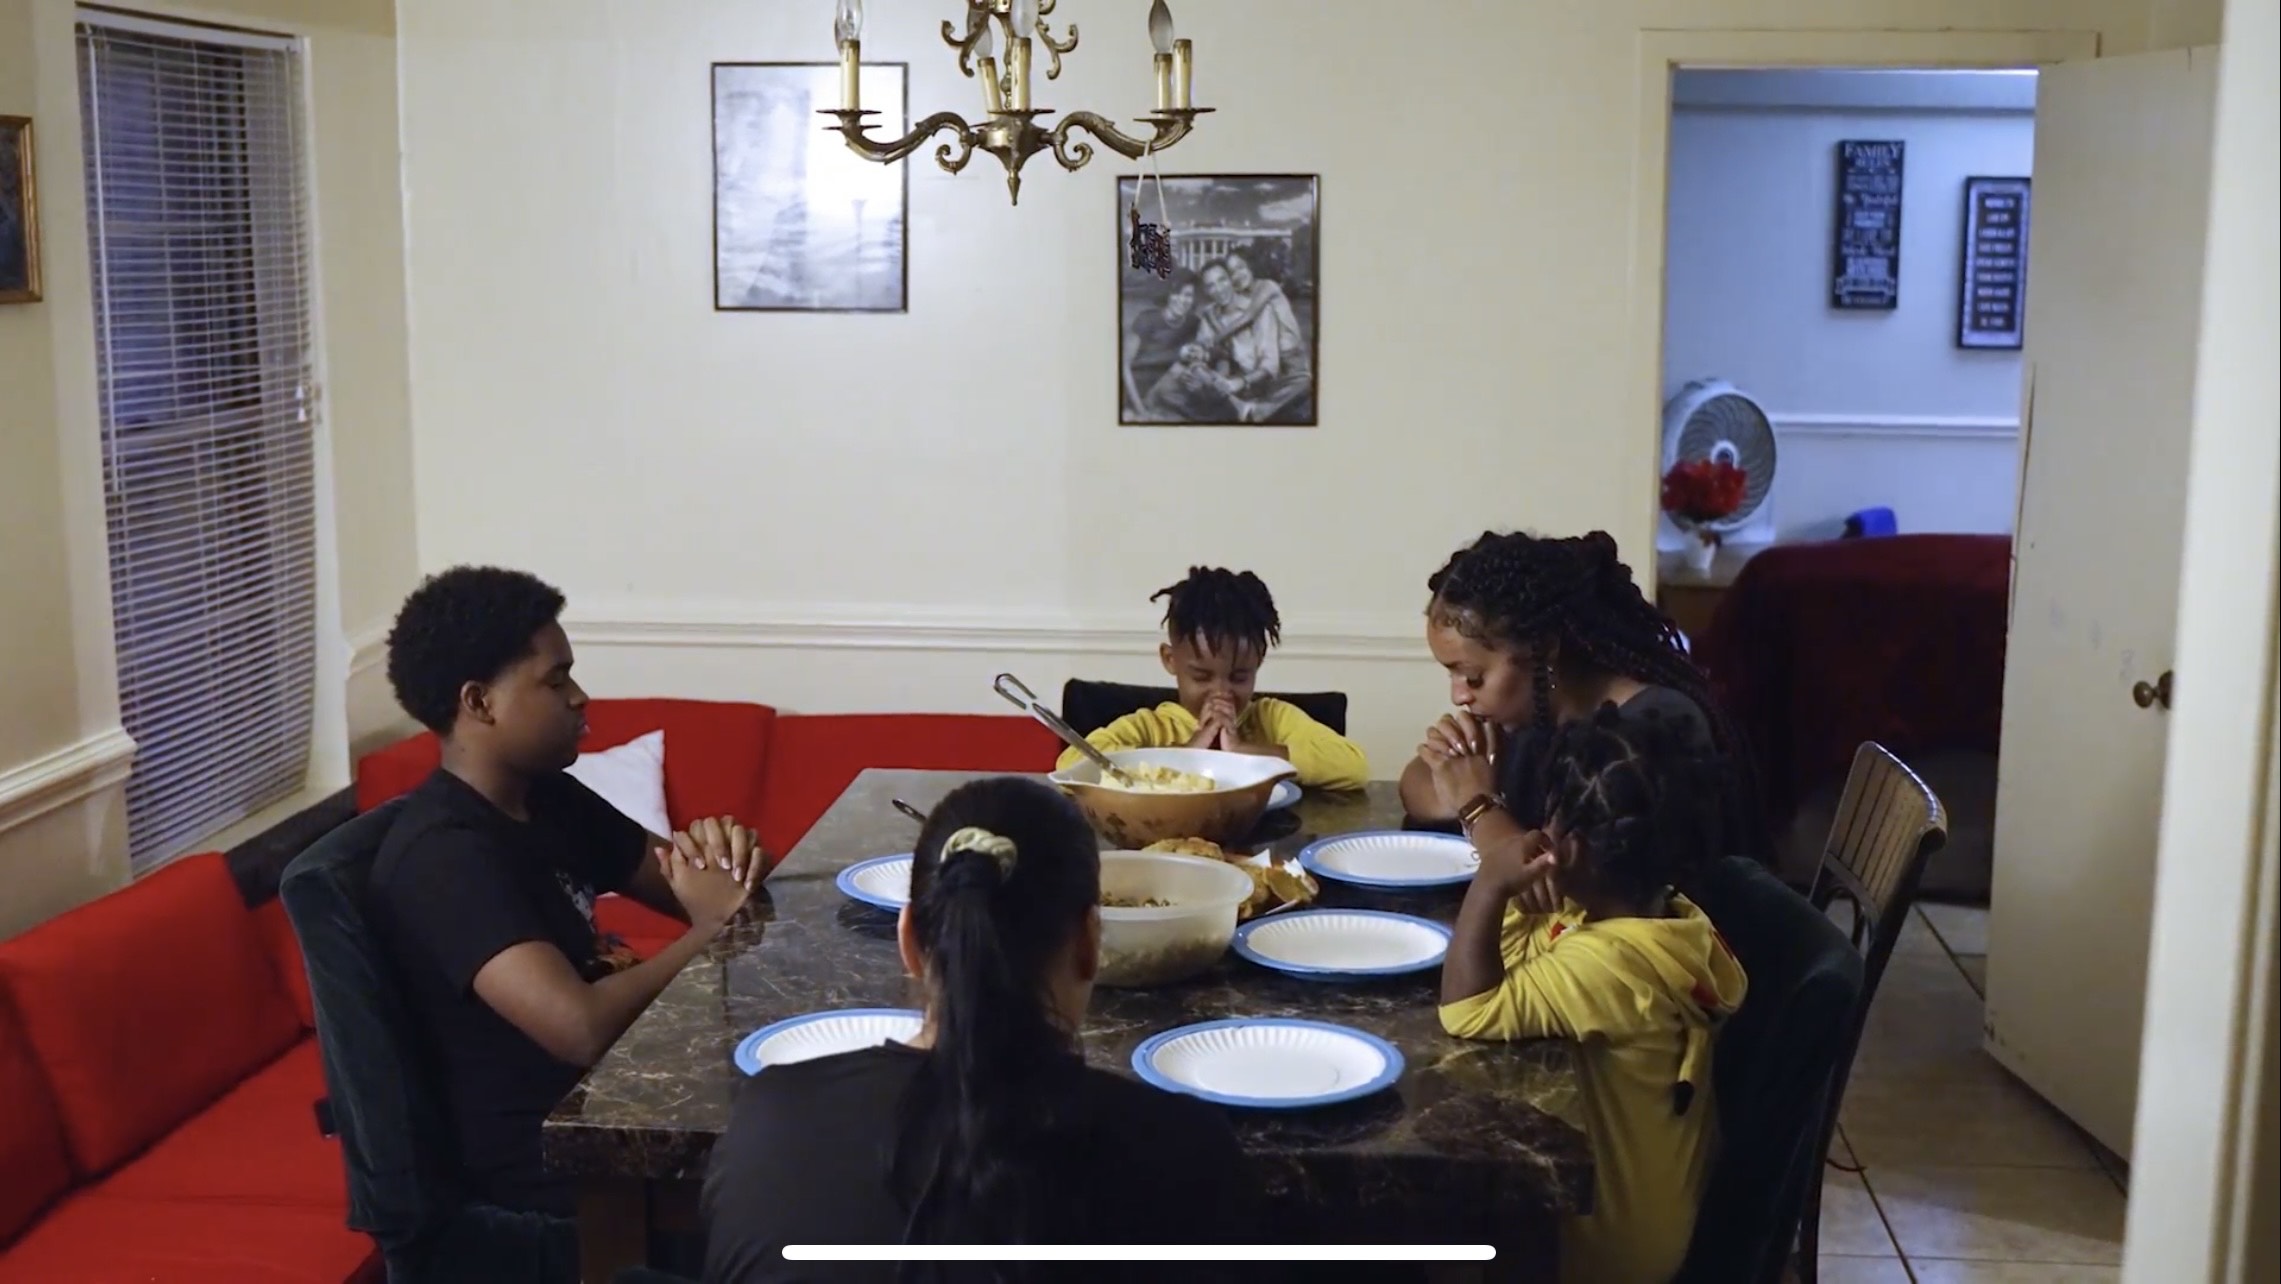 A family of five sits at the dinner and prays together